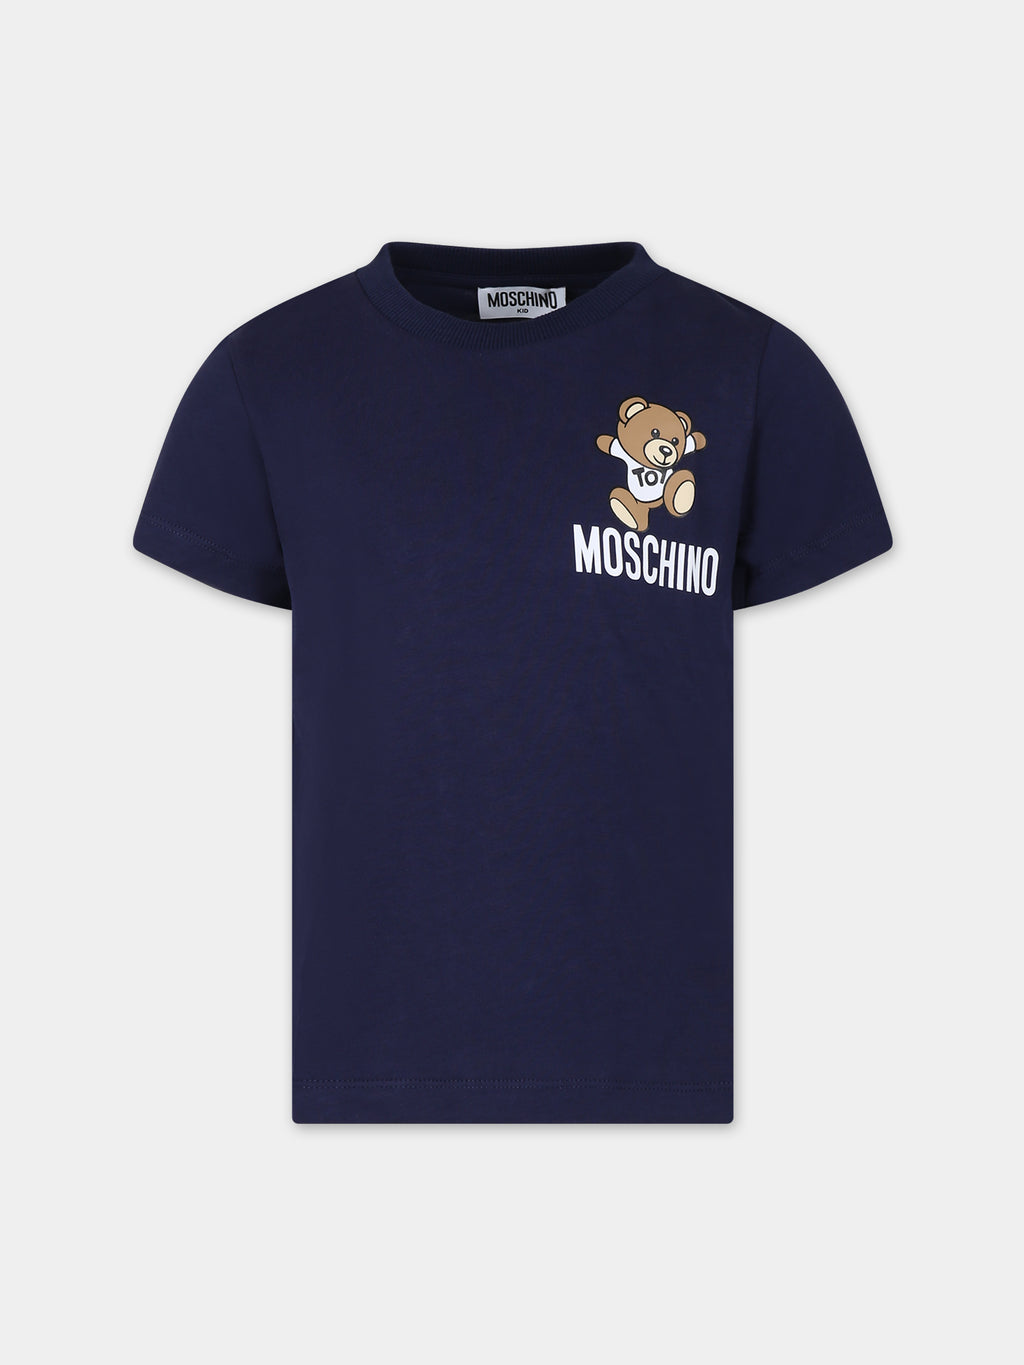 Blue t-shirt for kids with Teddy bear and logo